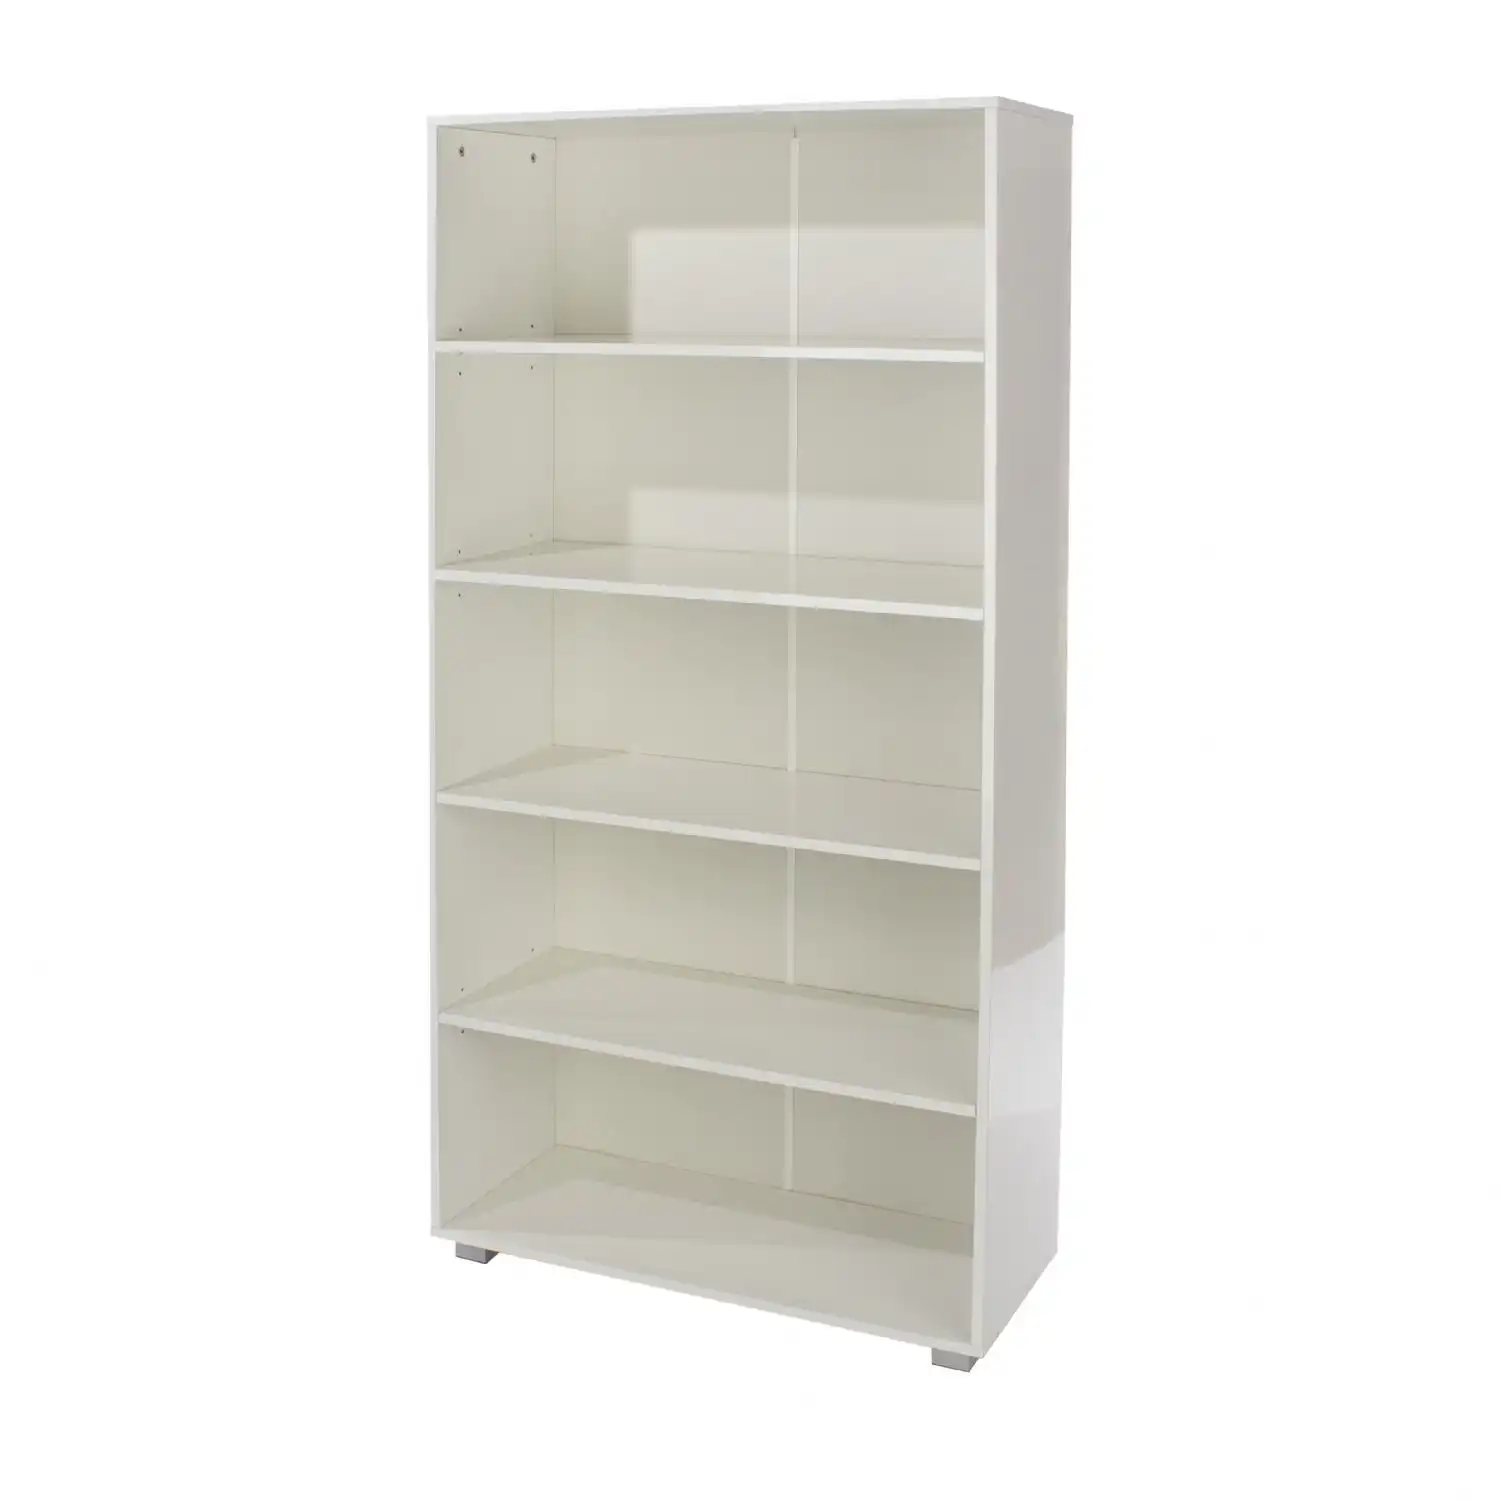 tall bookcase